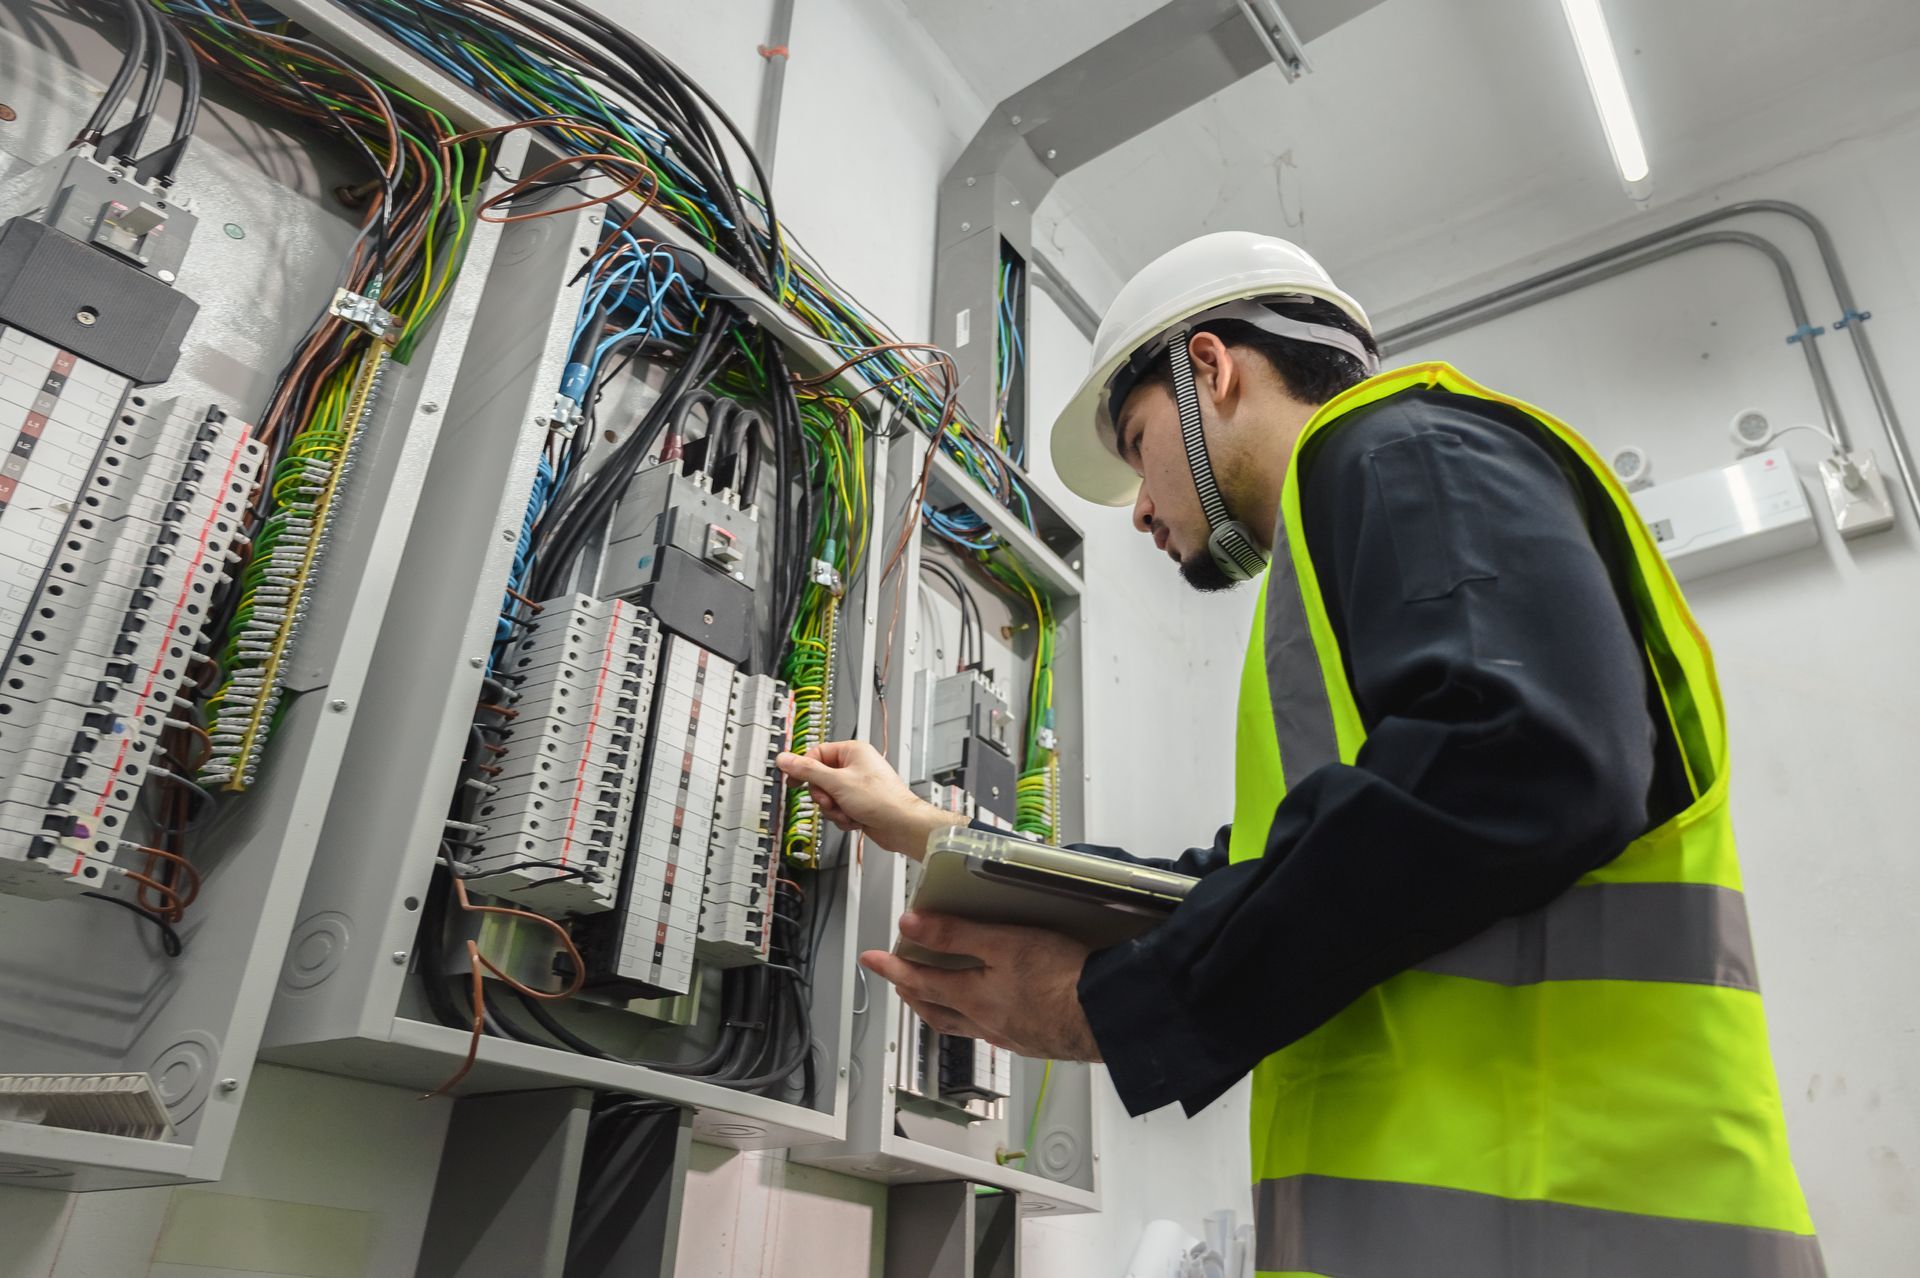 Electrical engineer using a tablet to monitor operations of an electrical control panel during installation.